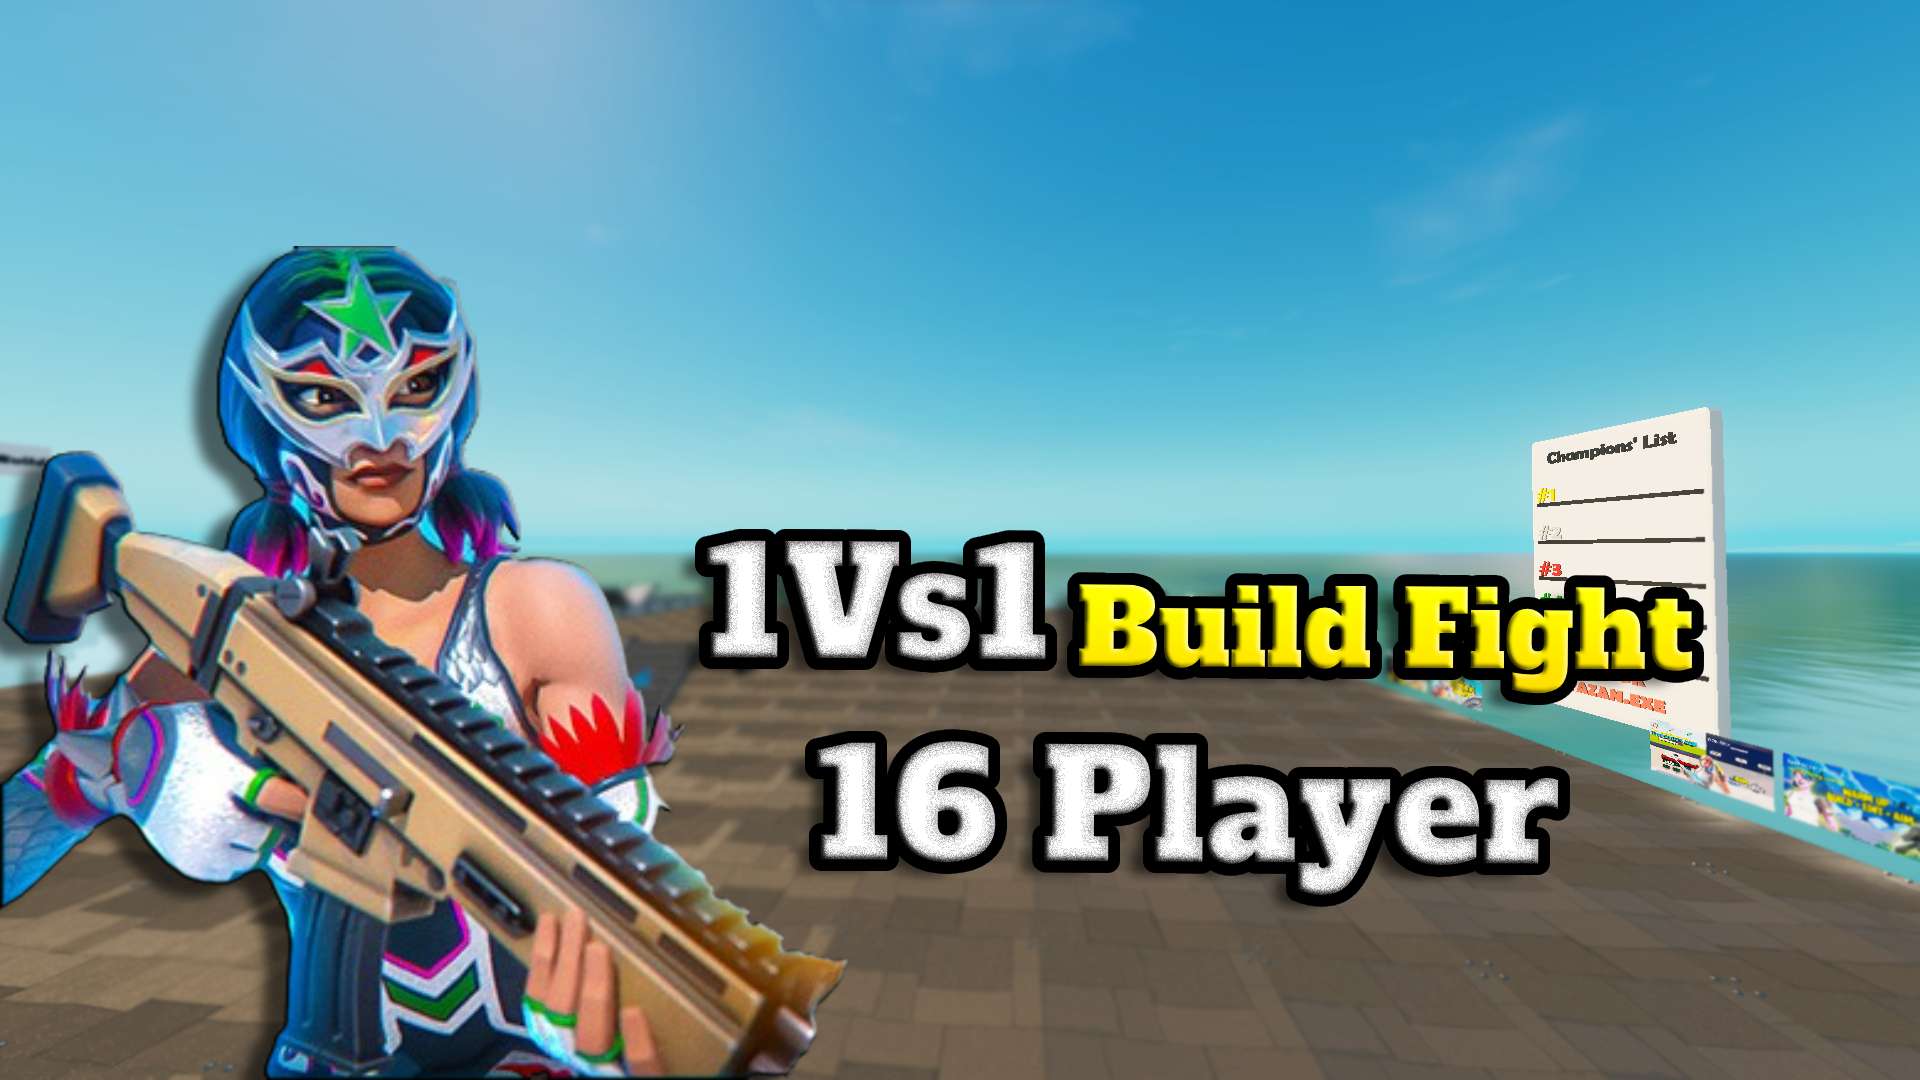 FREE FOR ALL BUILD FIGHT